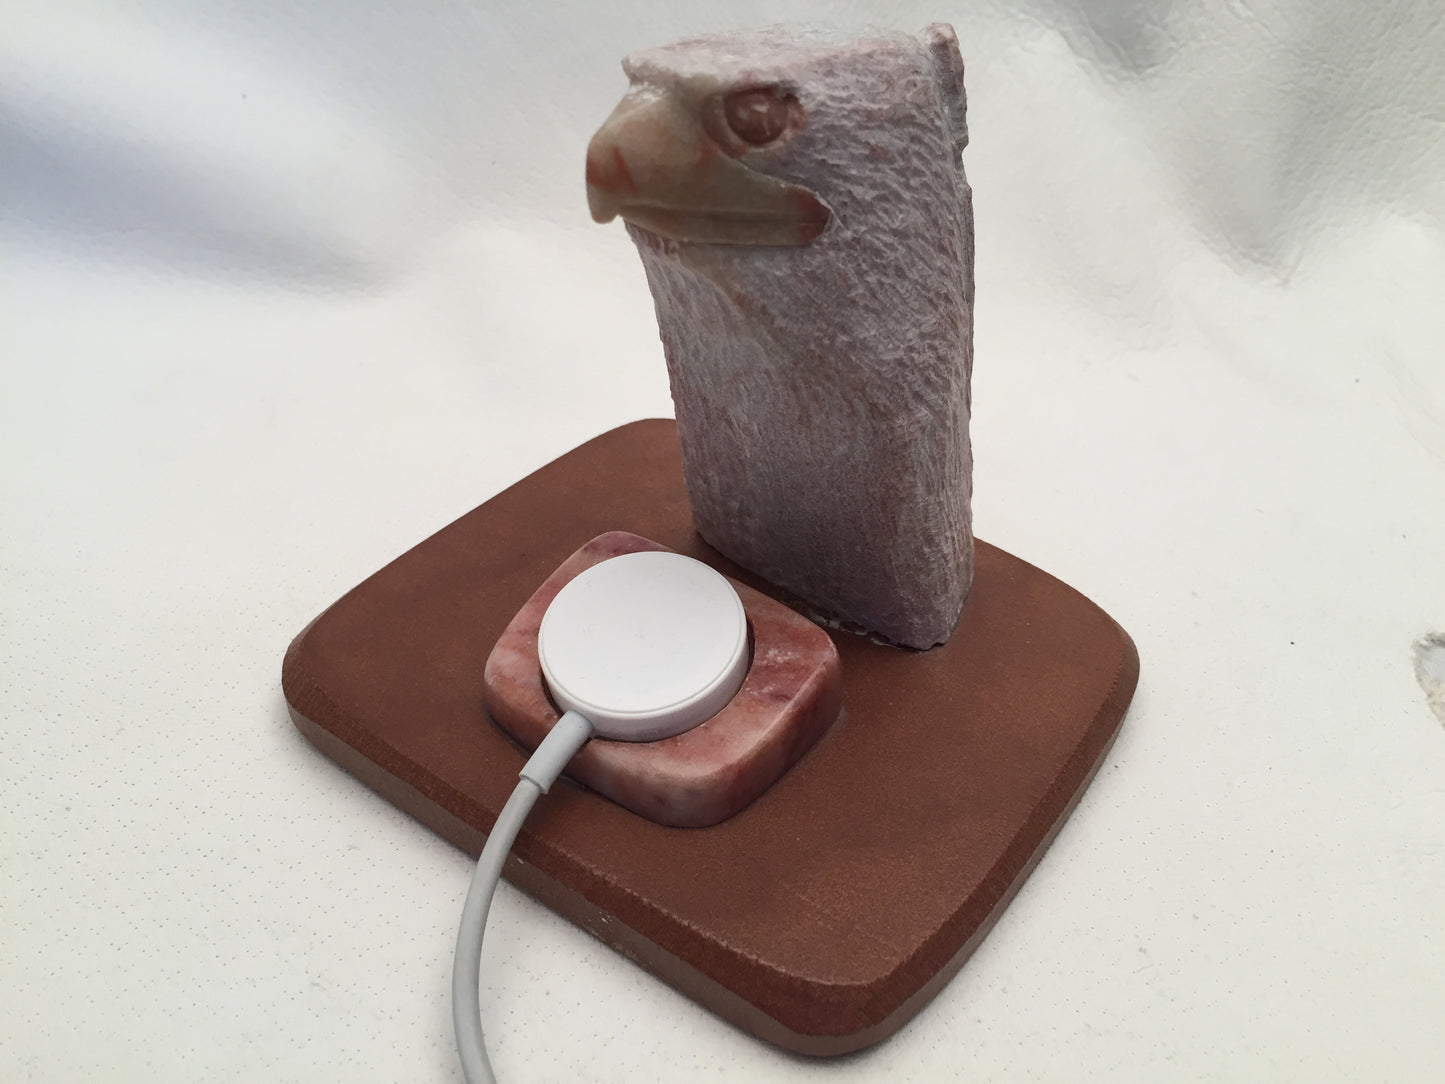 Native American Apple WATCH Eagle Head Charging Stand (Profile)